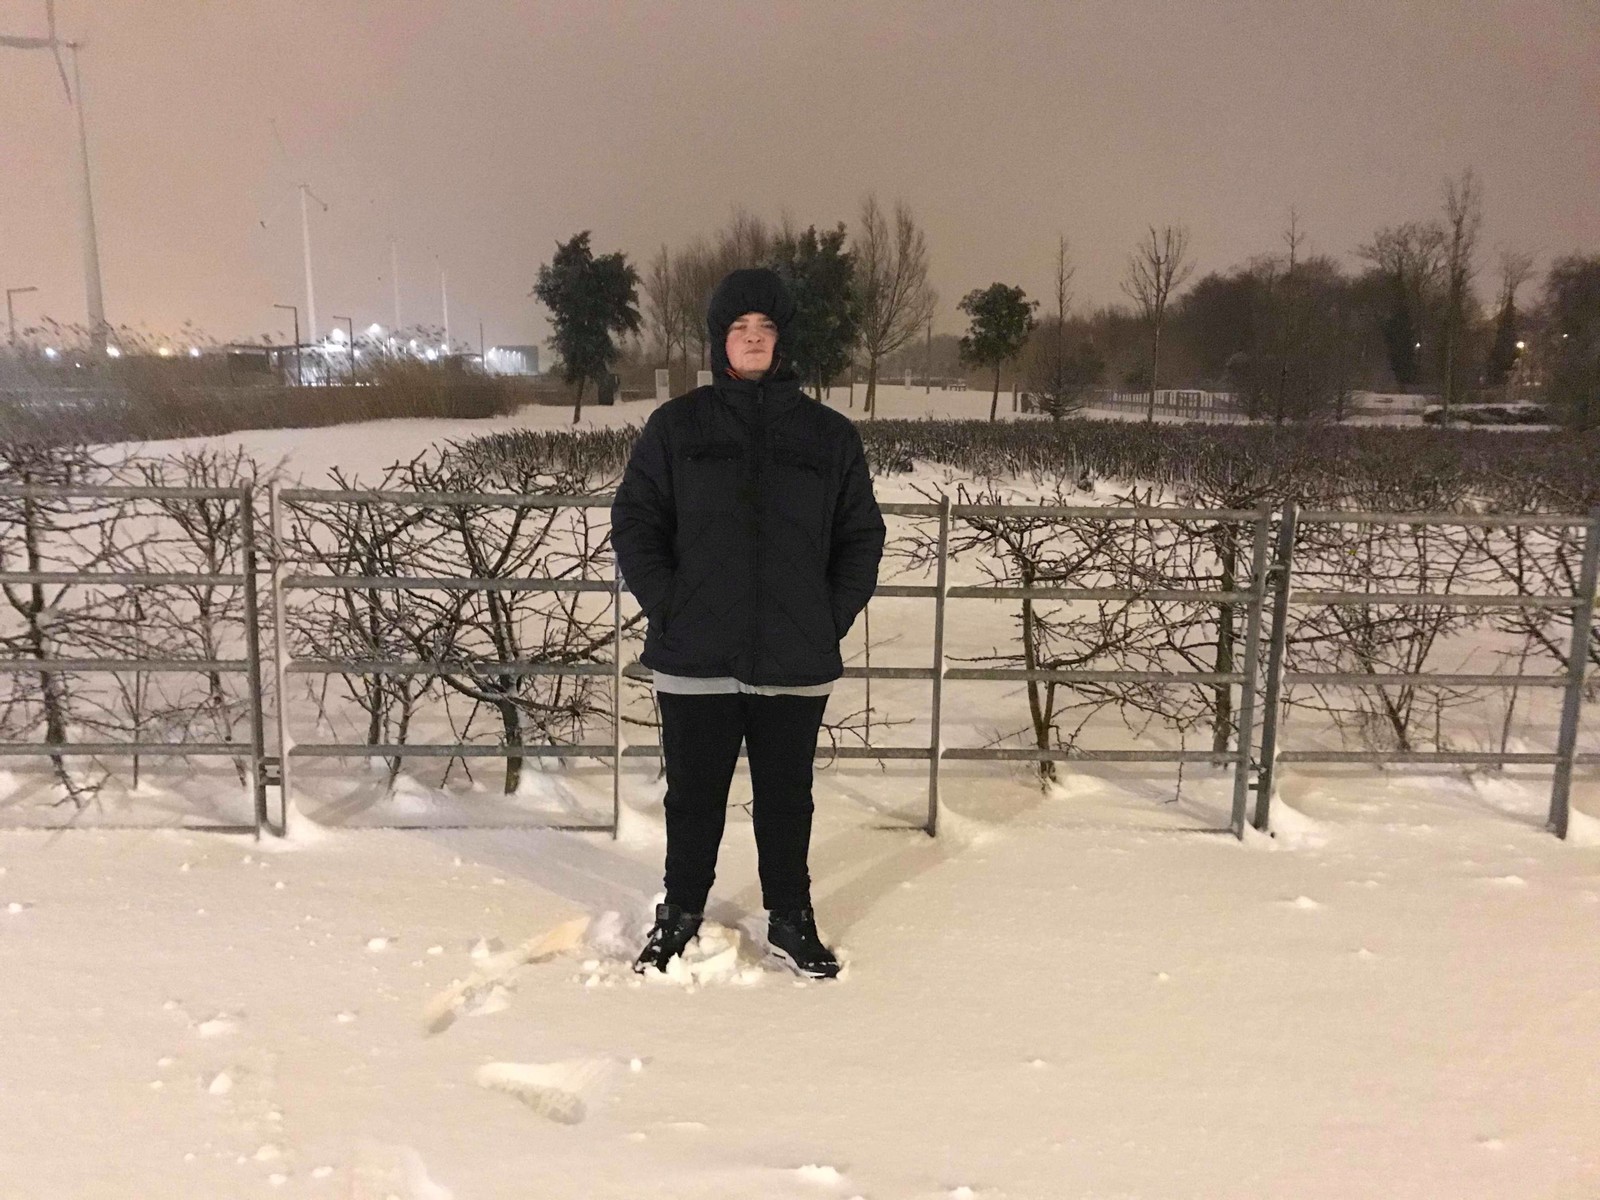 Me, BruenSryan, standing in front of a snow covered Father Collins' Park on 2 Mar 2018.